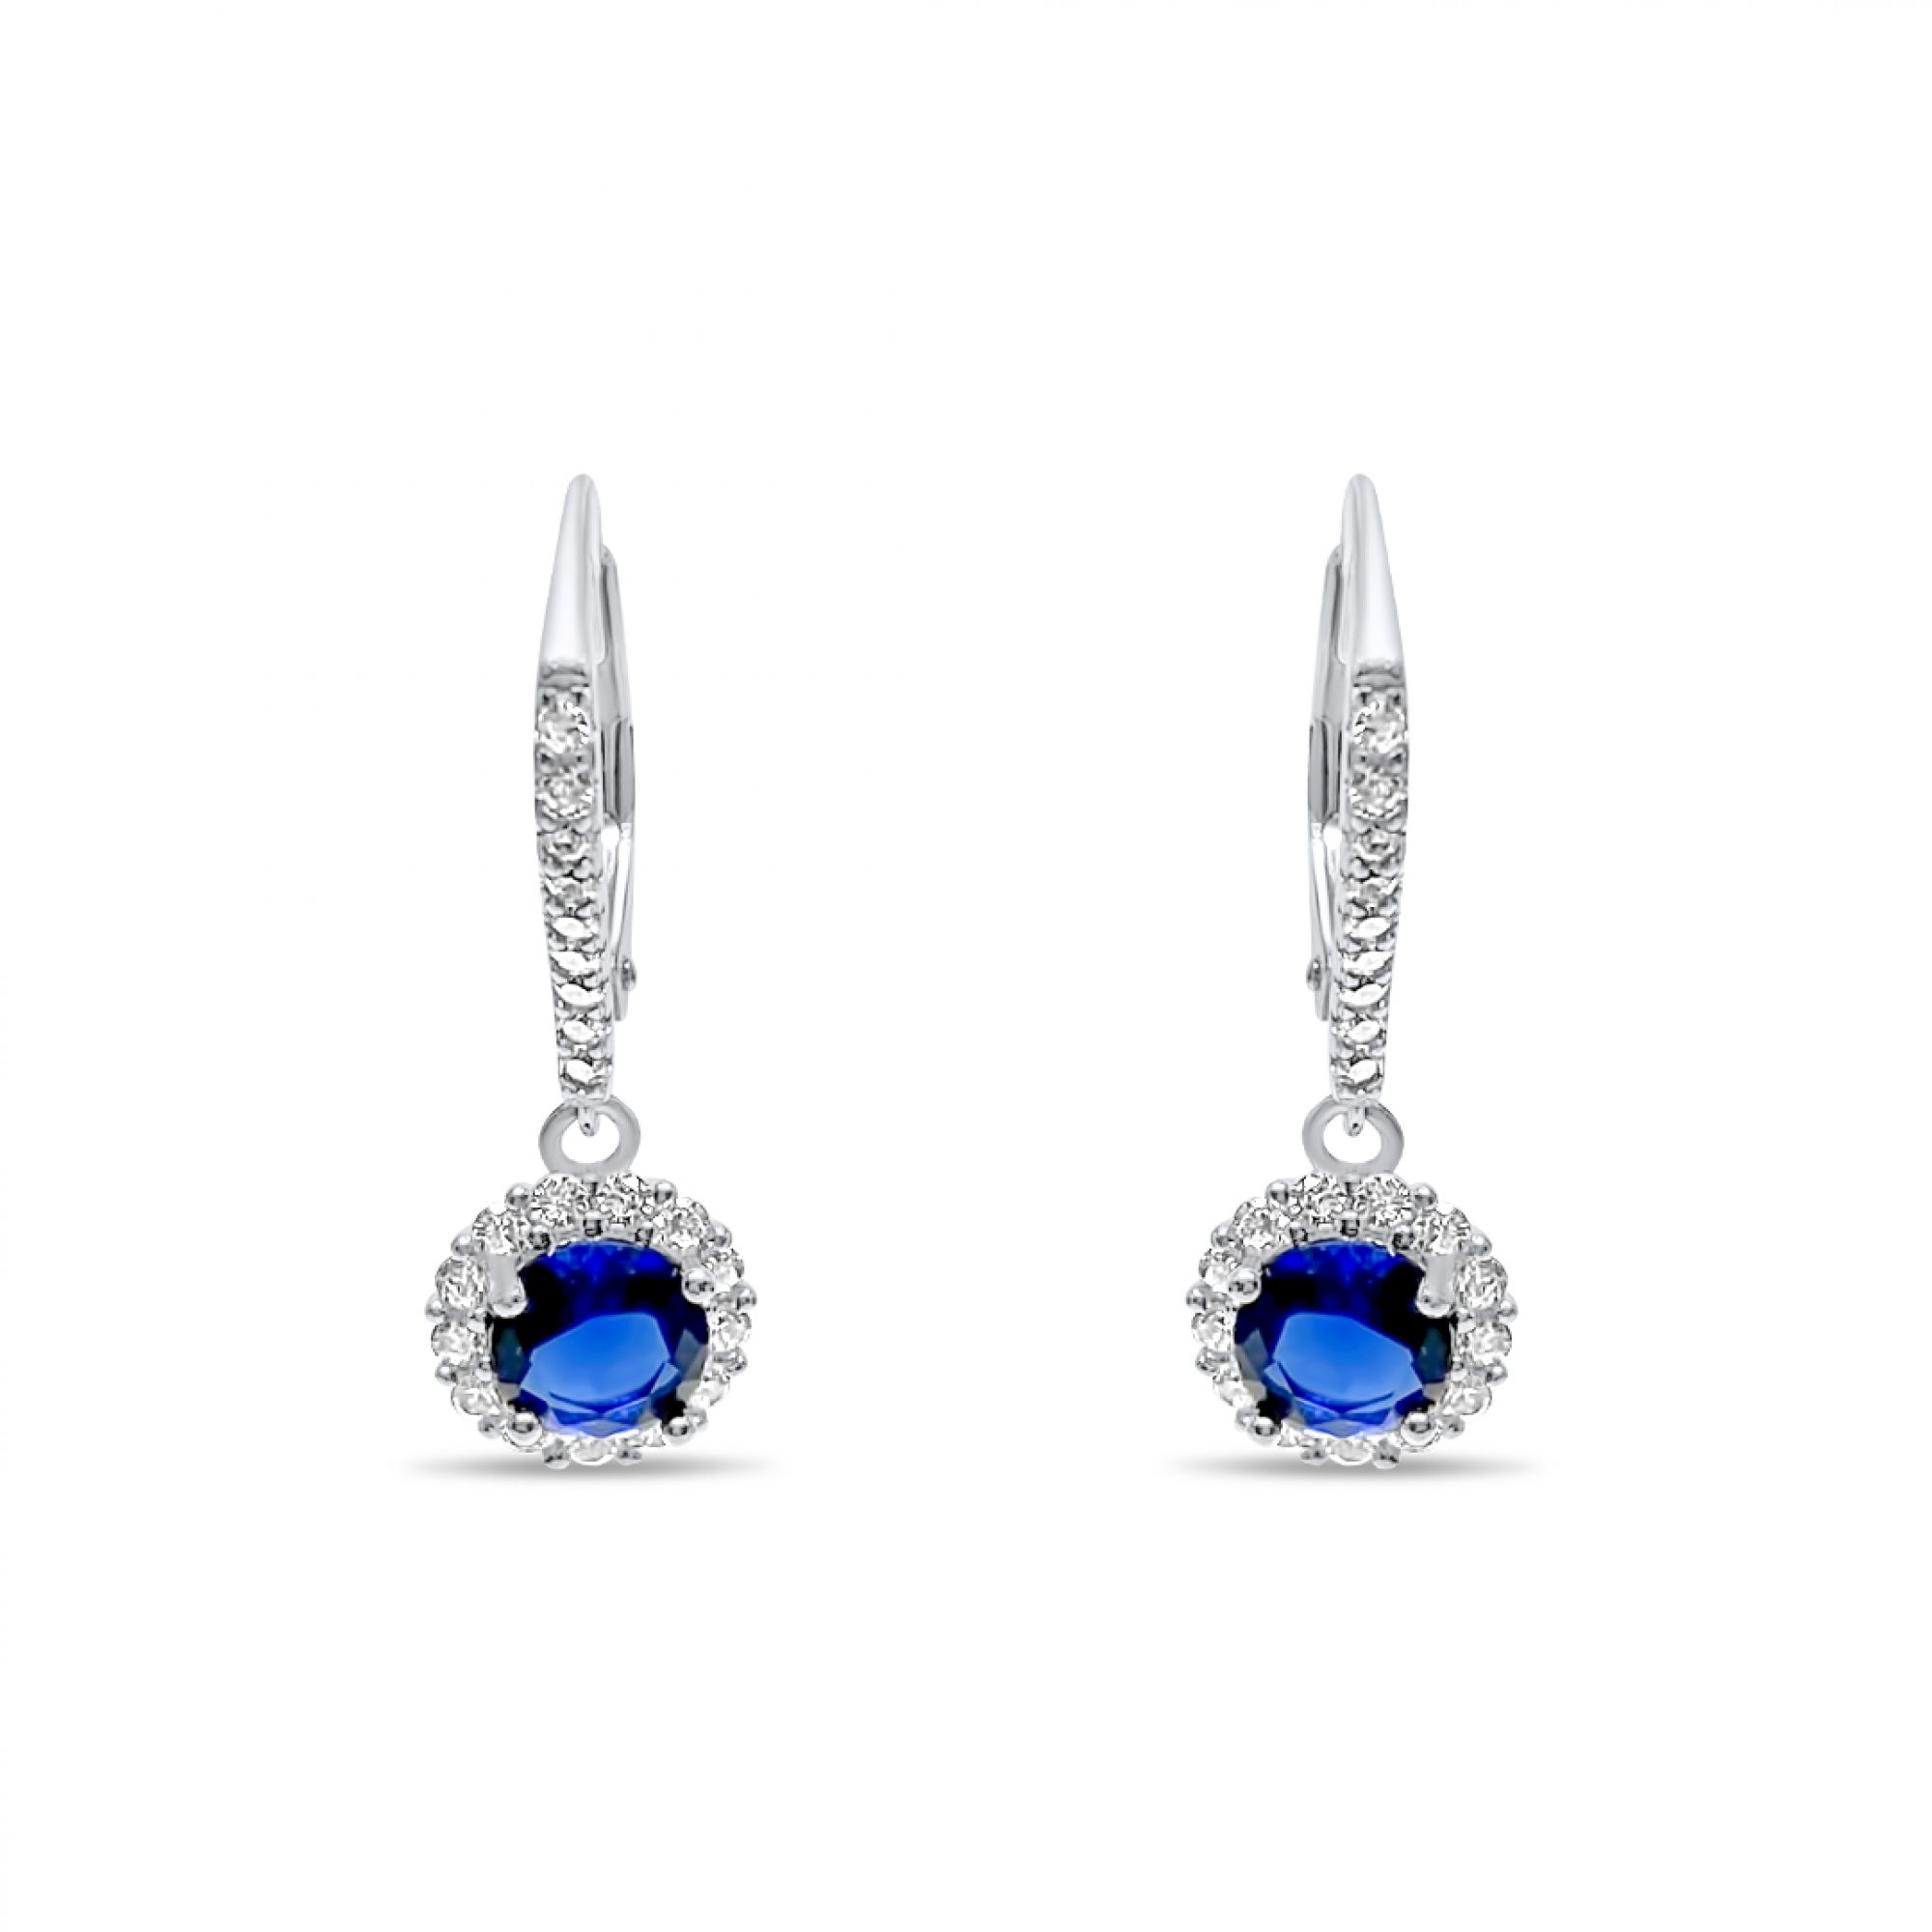 Silver earrings with zircon stones and sapphire